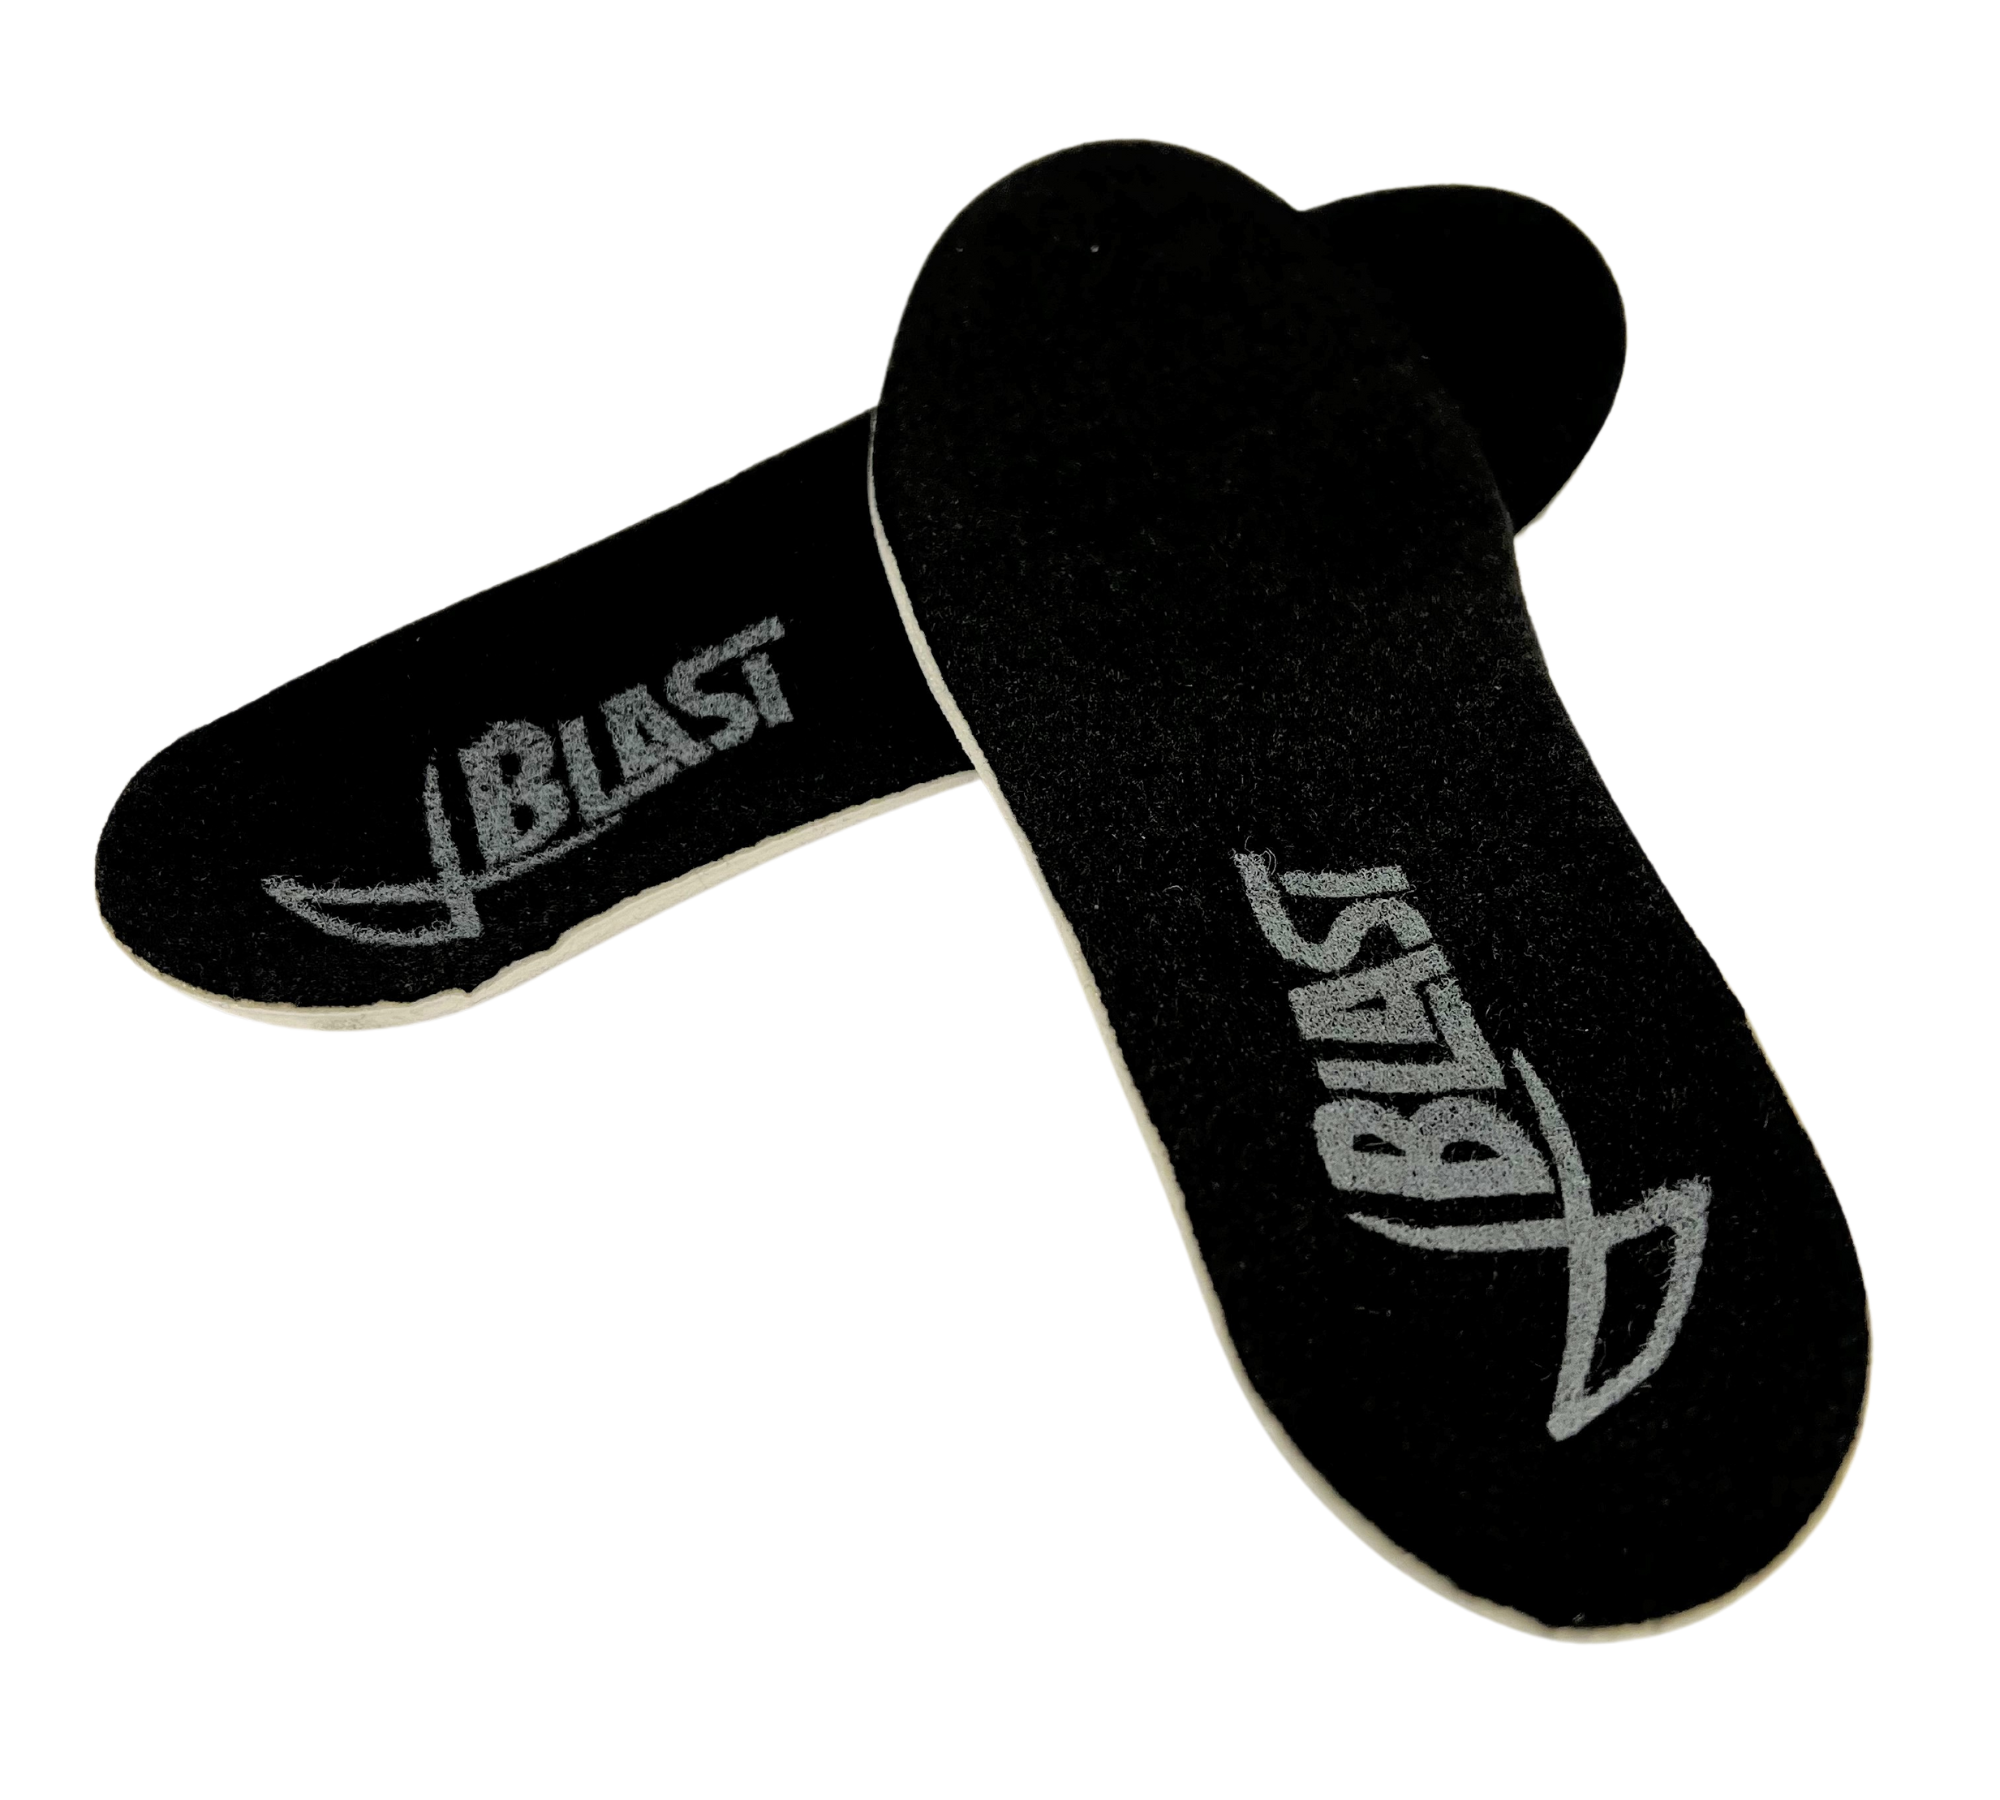 Thermoformed sole (Pair)